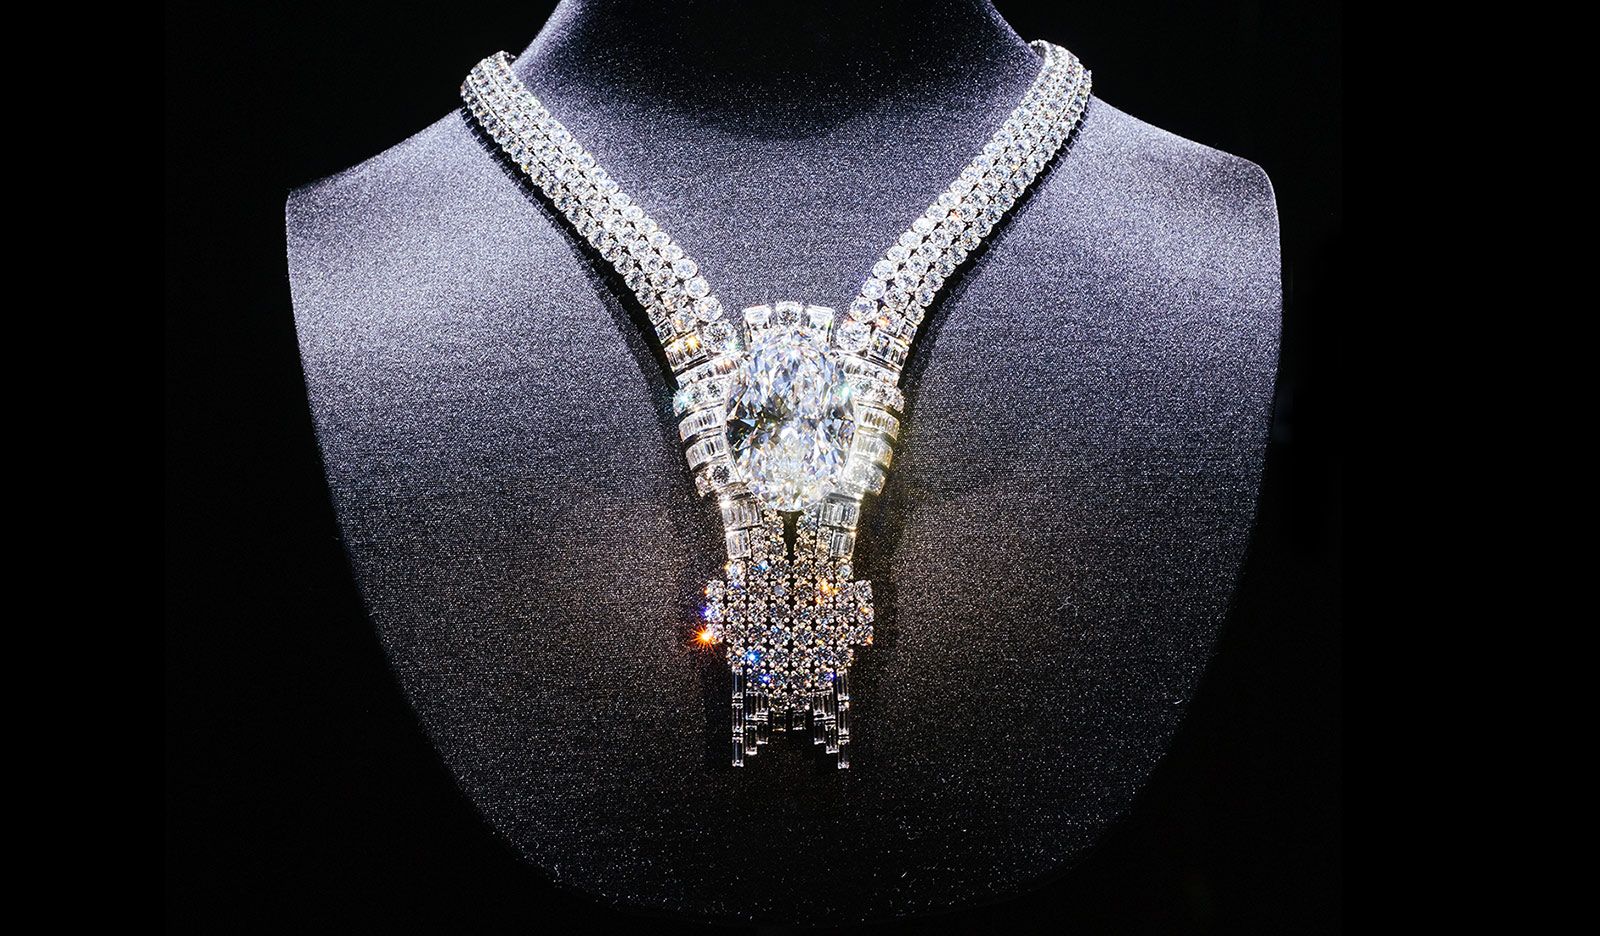 Tiffany & Co. World's Fair necklace set with an internally flawless, oval-shaped, D-colour Type IIa diamond weighing over 80 carats